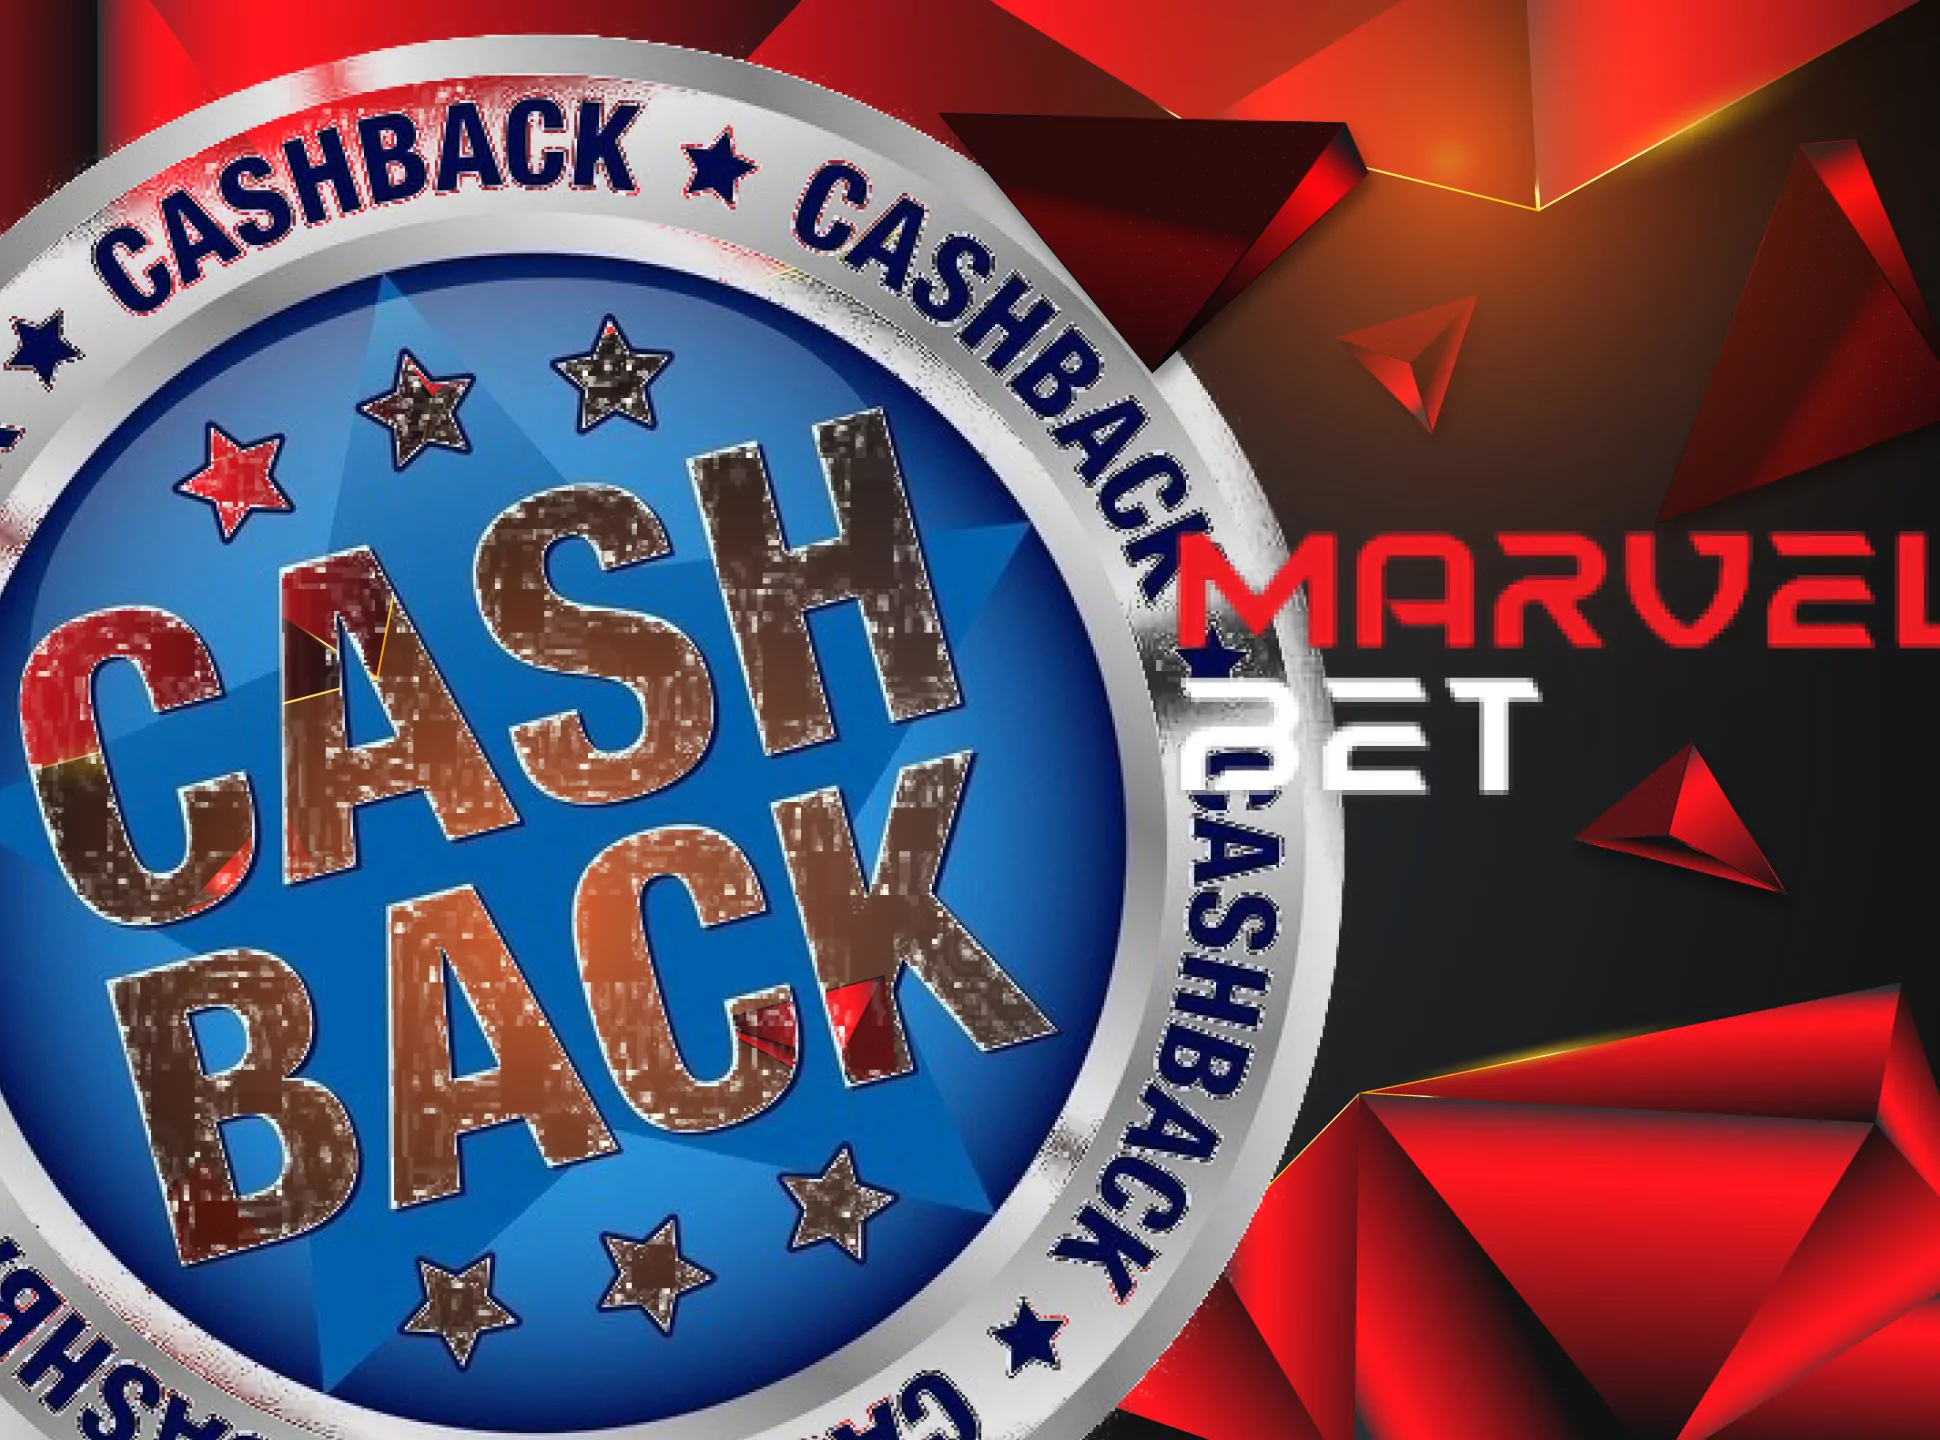 You can get cashback from Marvelbet.